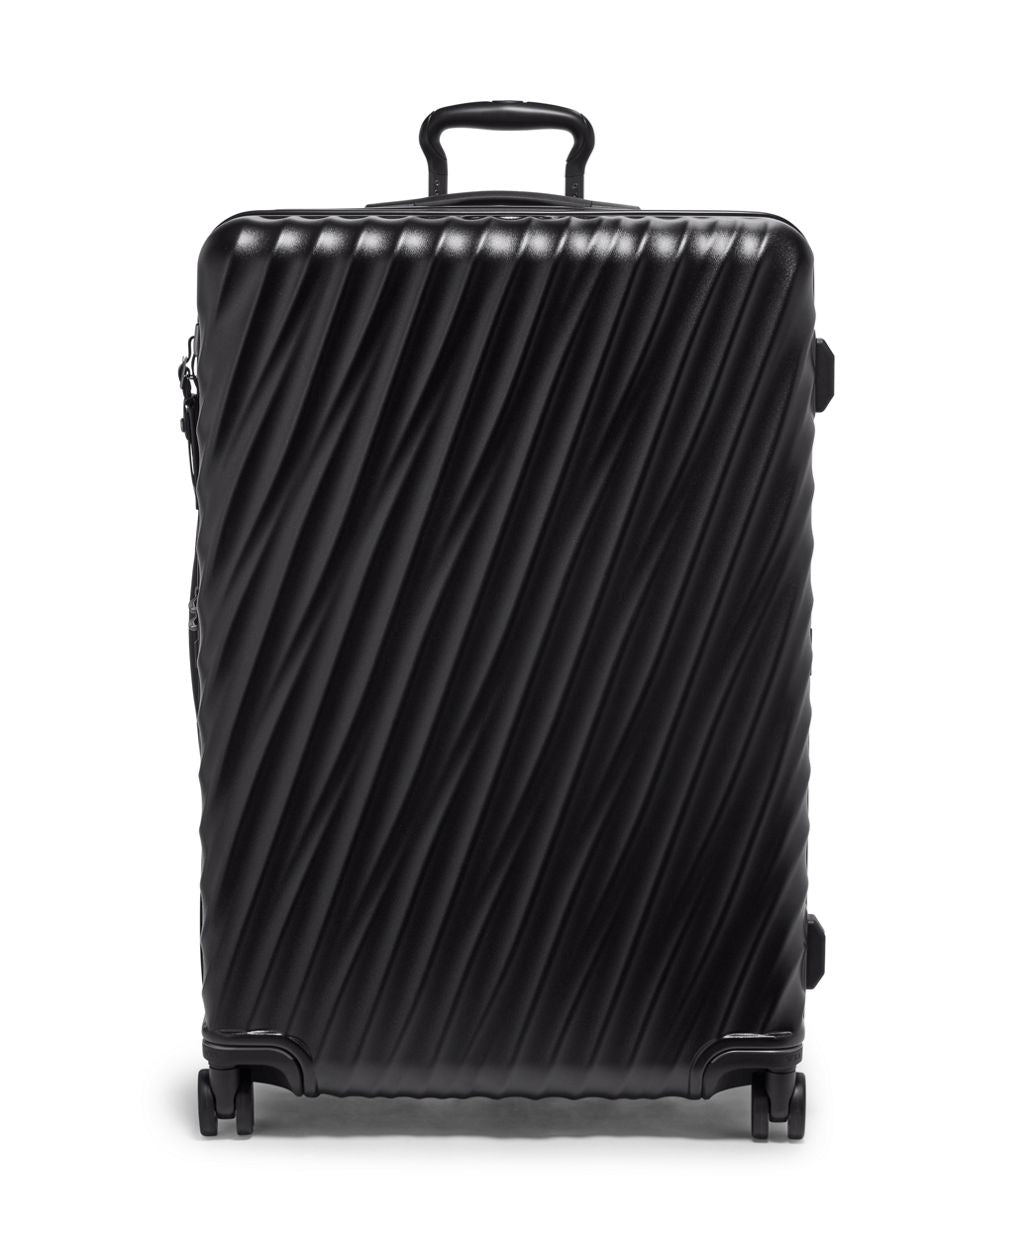 19 Degree Extended Trip Expandable 4-Wheeled Packing Case